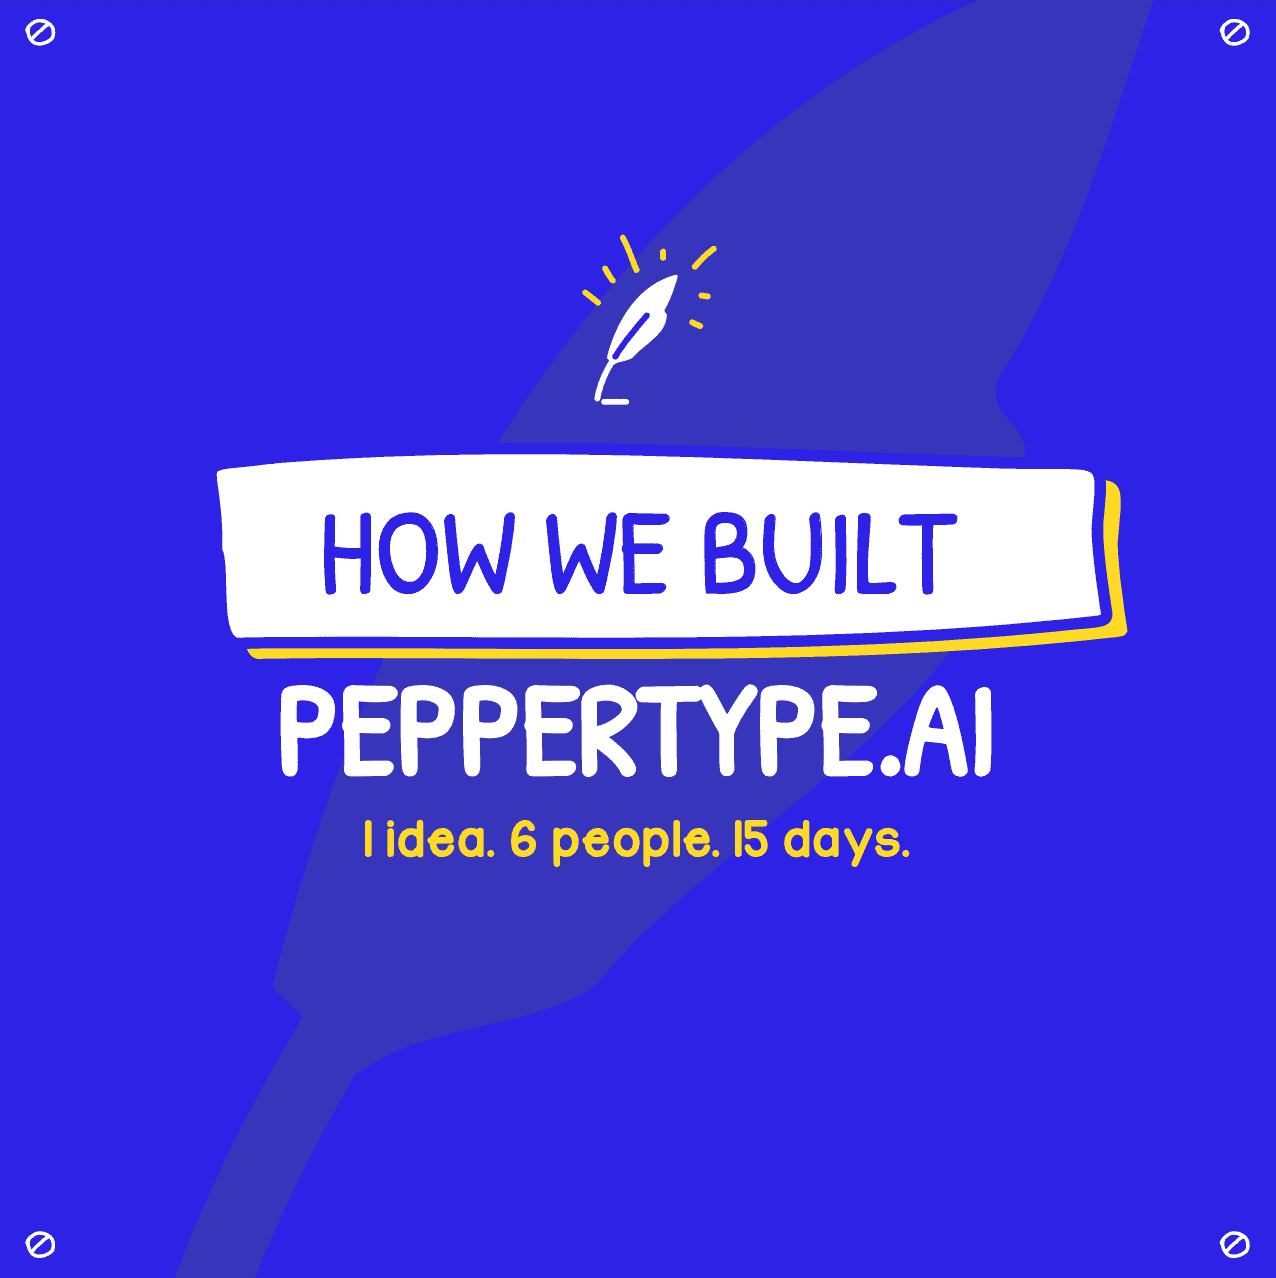 The Story Of How We Built Peppertype.ai In 15 Days!🚀